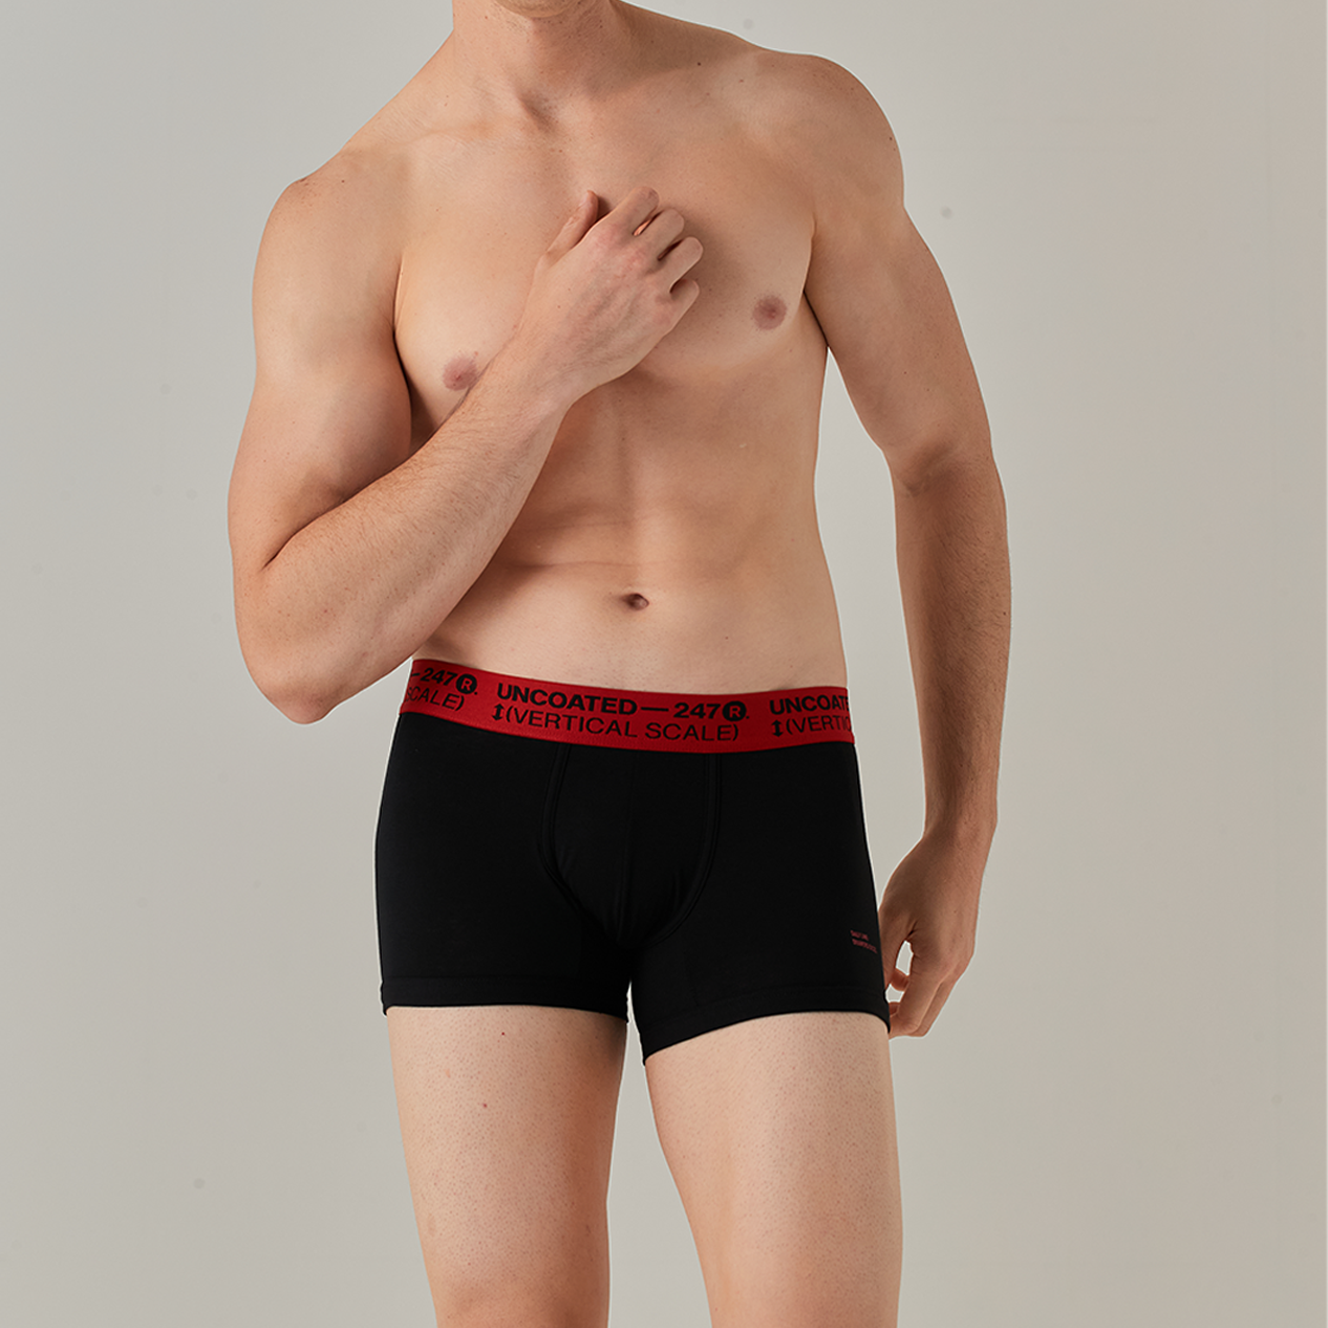 Uncoated 247 men's underwear in Ready Red with a simple style and skin-friendly texture for high comfort and breathability.